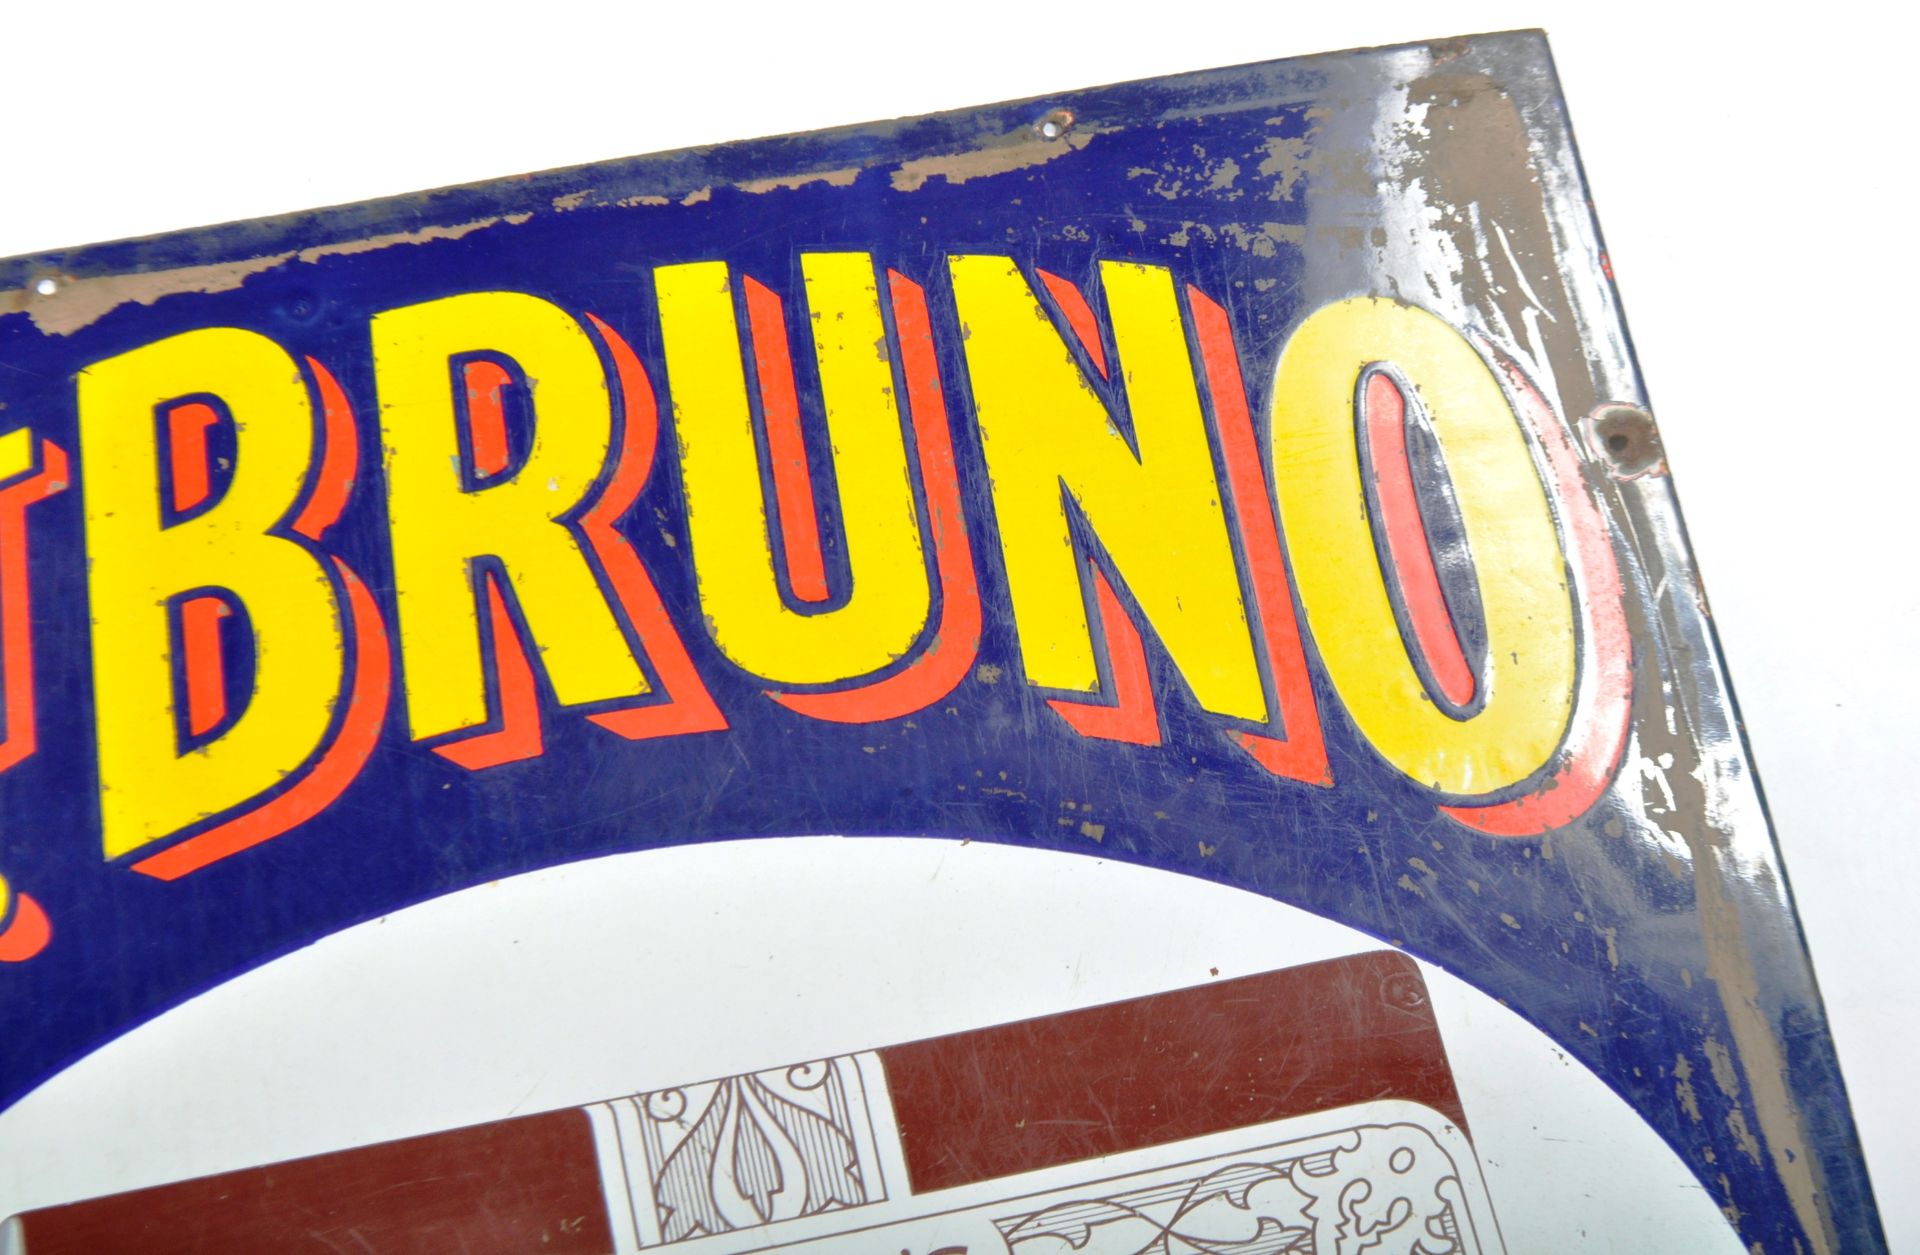 ST BRUNO FLAKE - OGDEN'S - EARLY 20TH ENAMEL ADVERTISING SIGN - Image 4 of 7